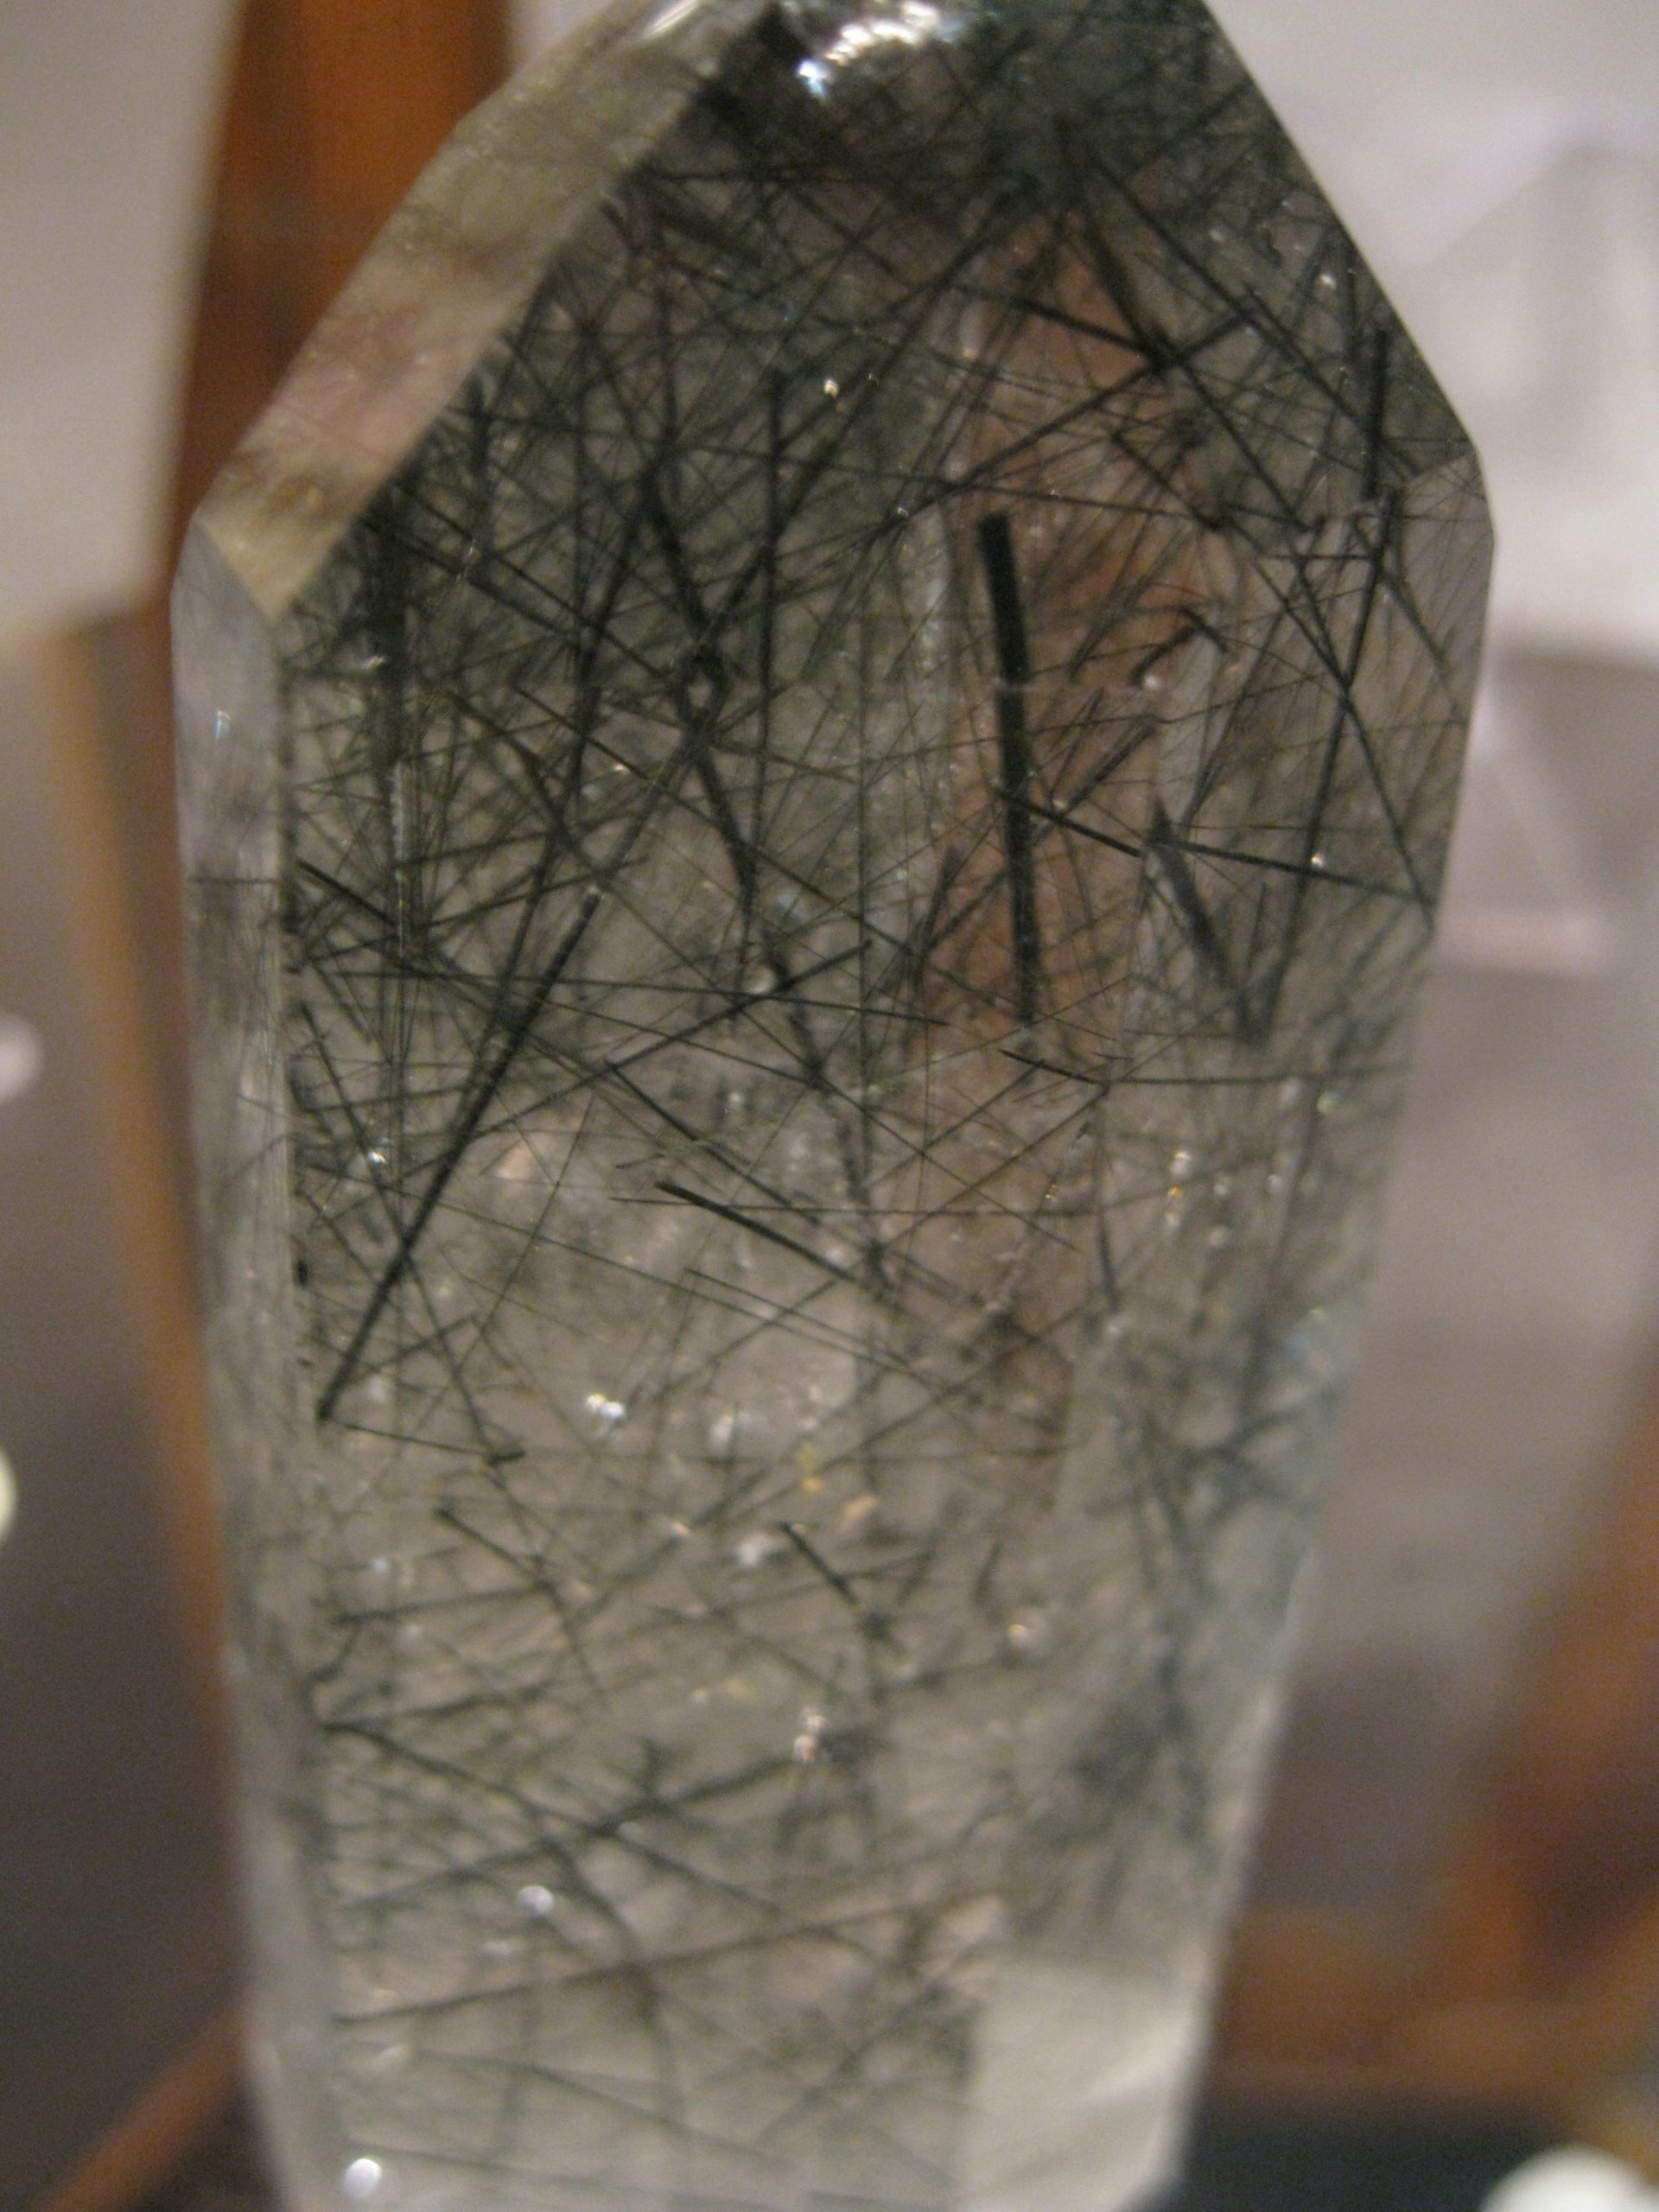 Quartz-with-needle-shaped-inclusions-of-rutile